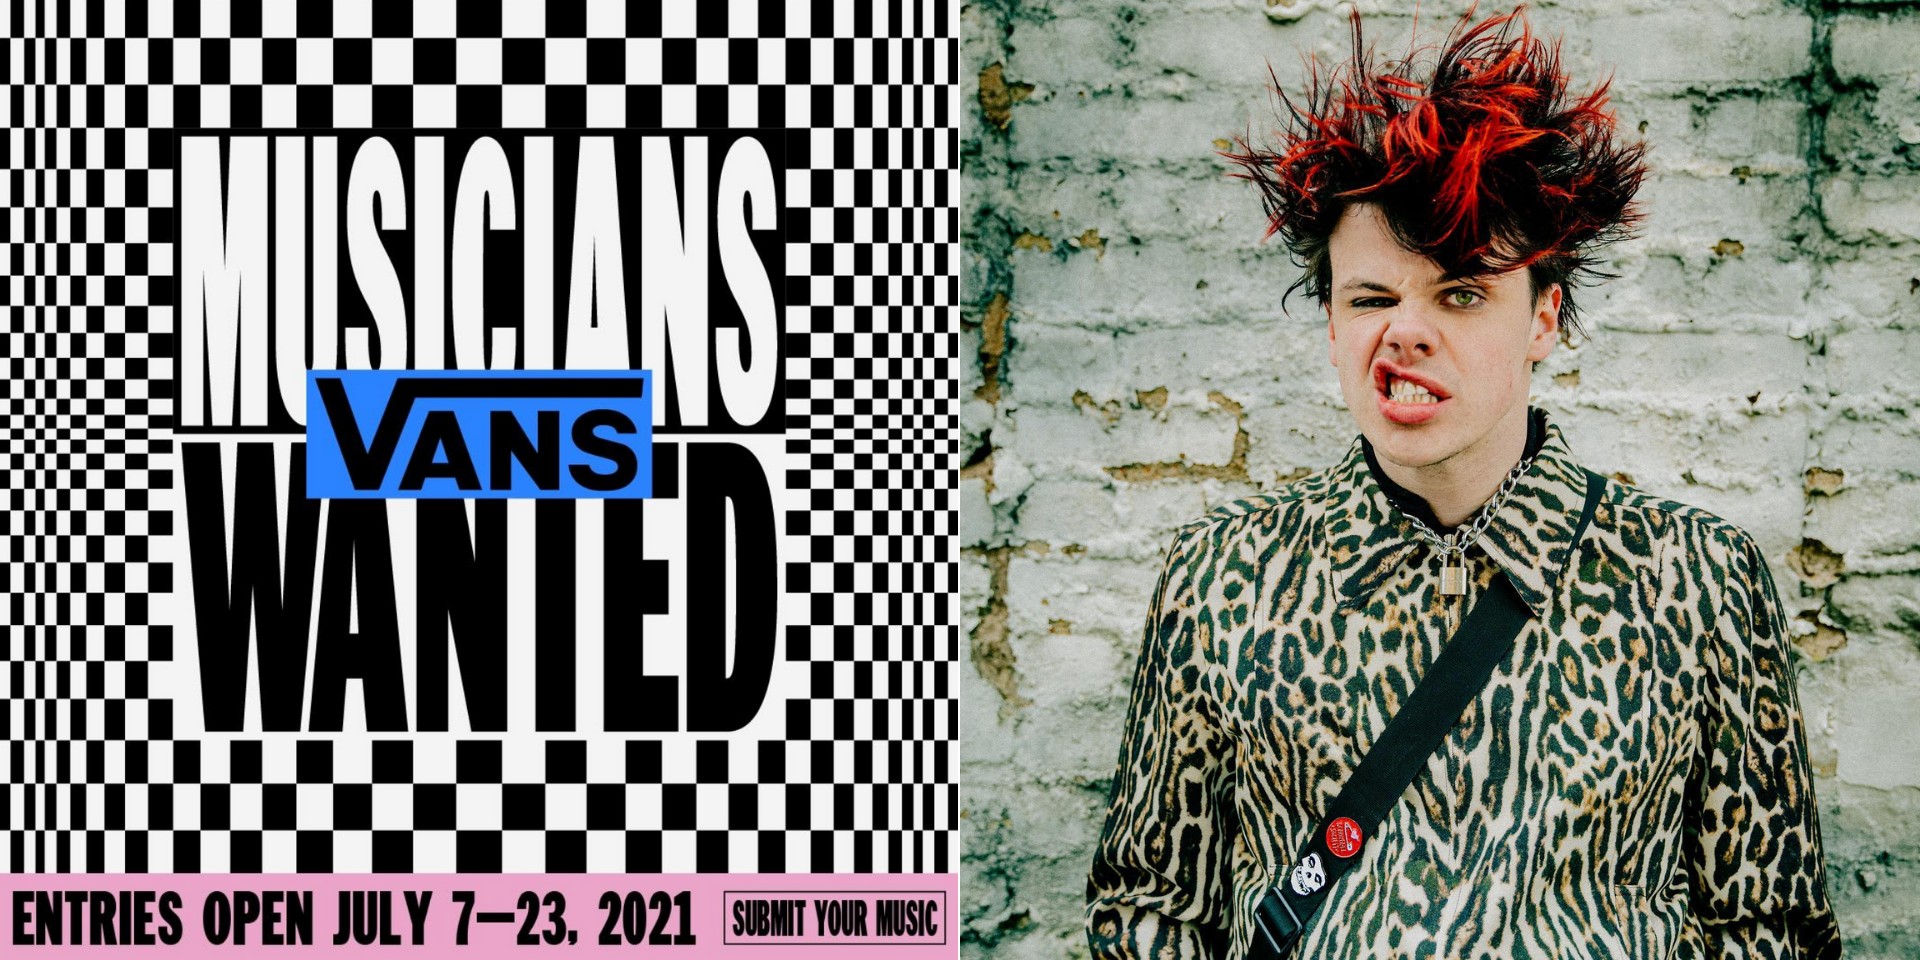 Vans Musicians Wanted 2021 now open for original music submissions, global winner to share the stage with YUNGBLUD